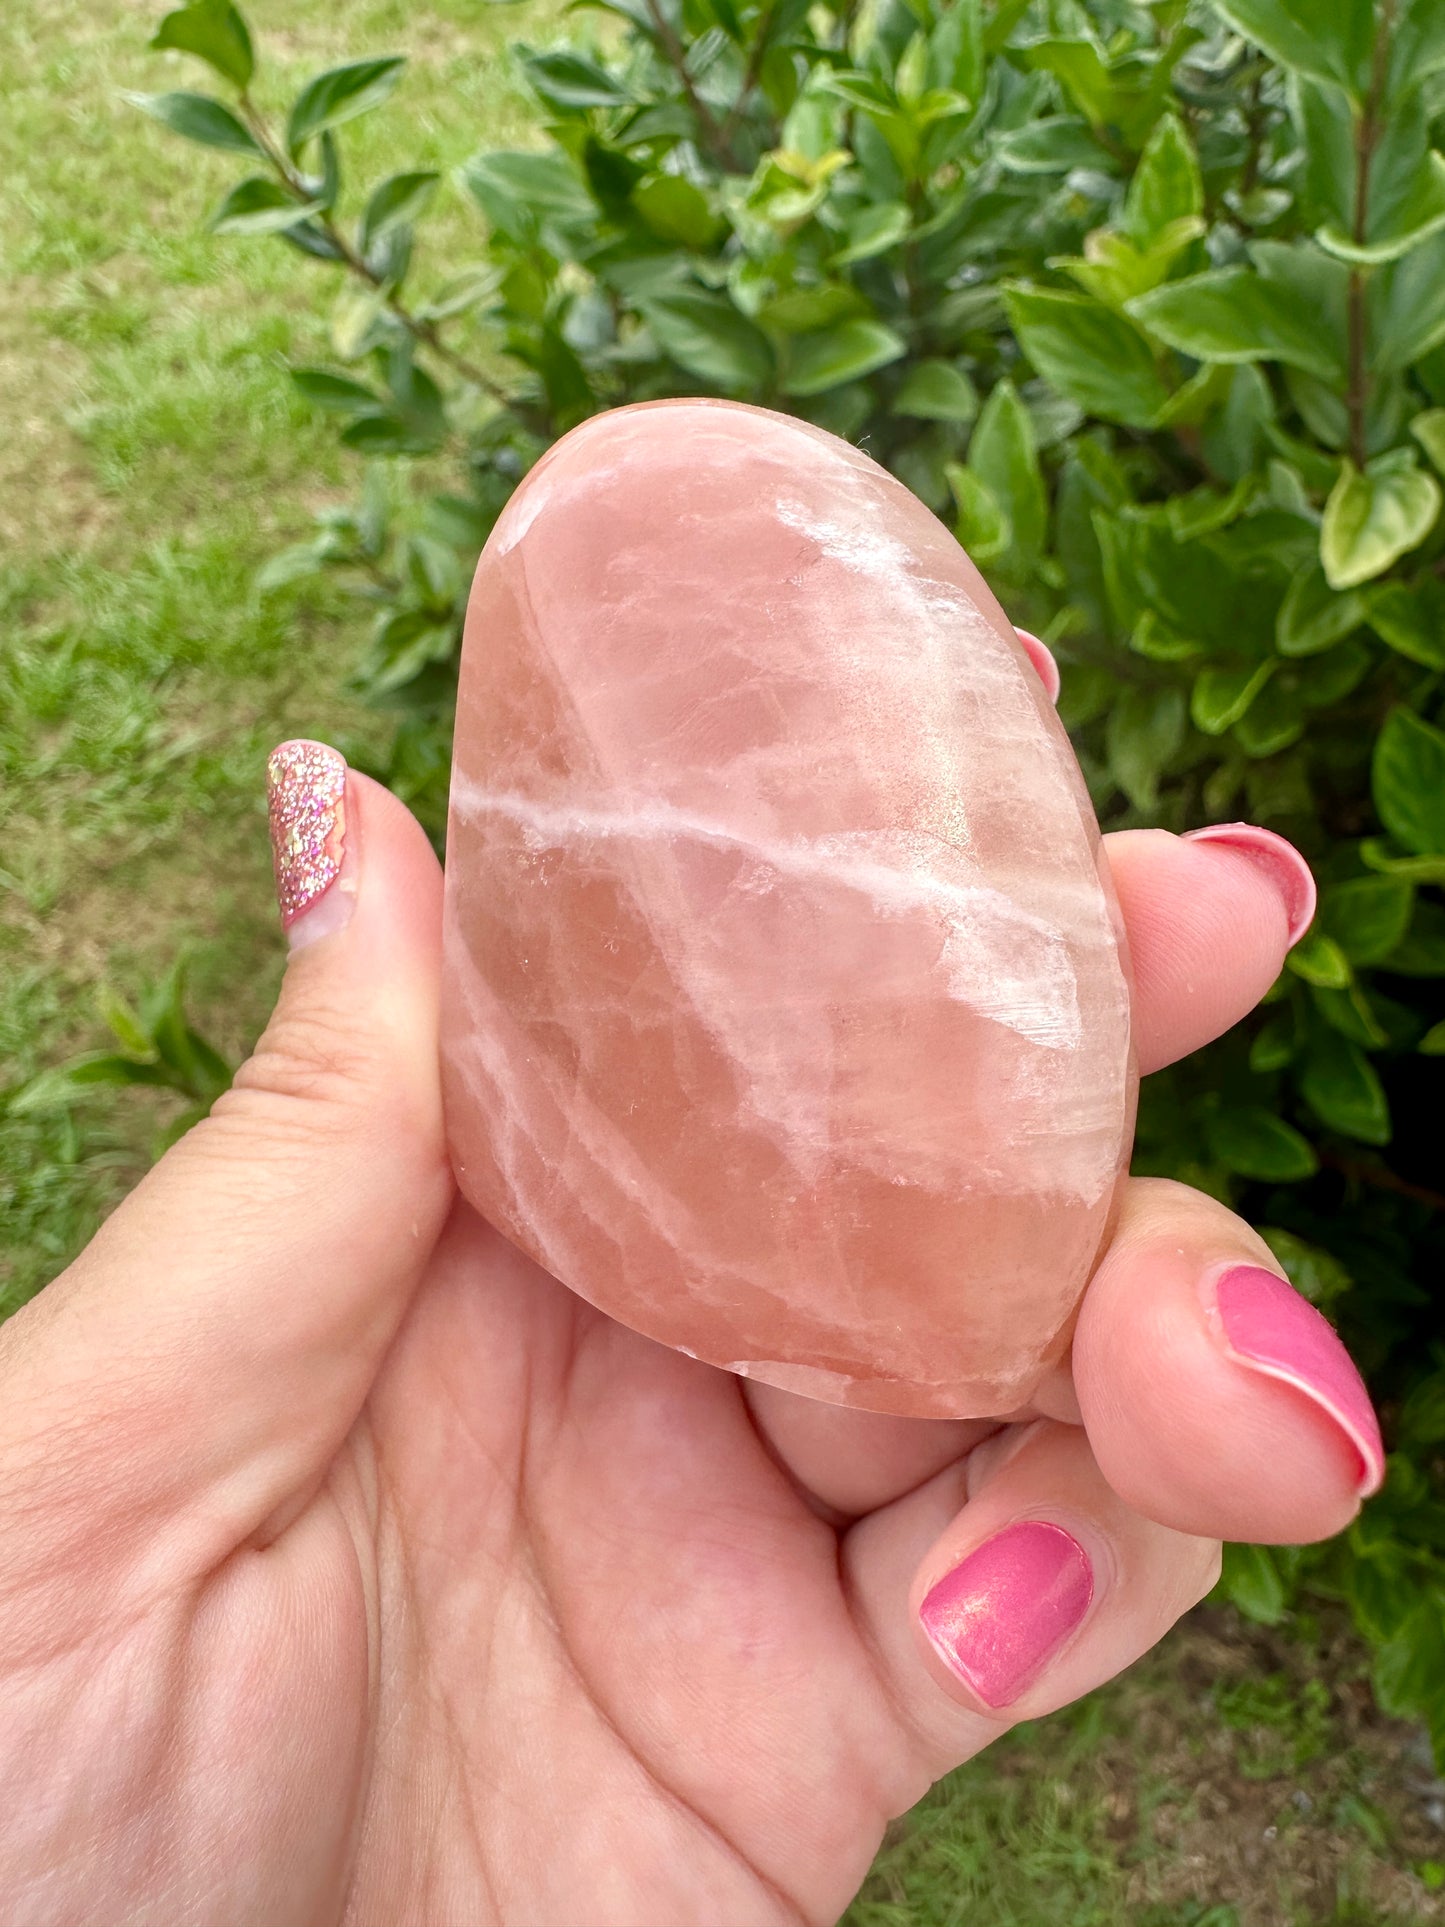 Rose Calcite Freeform - Natural Healing Crystal, Hand-Picked Love and Harmony Stone, Unique Pink Calcite for Energy Balance